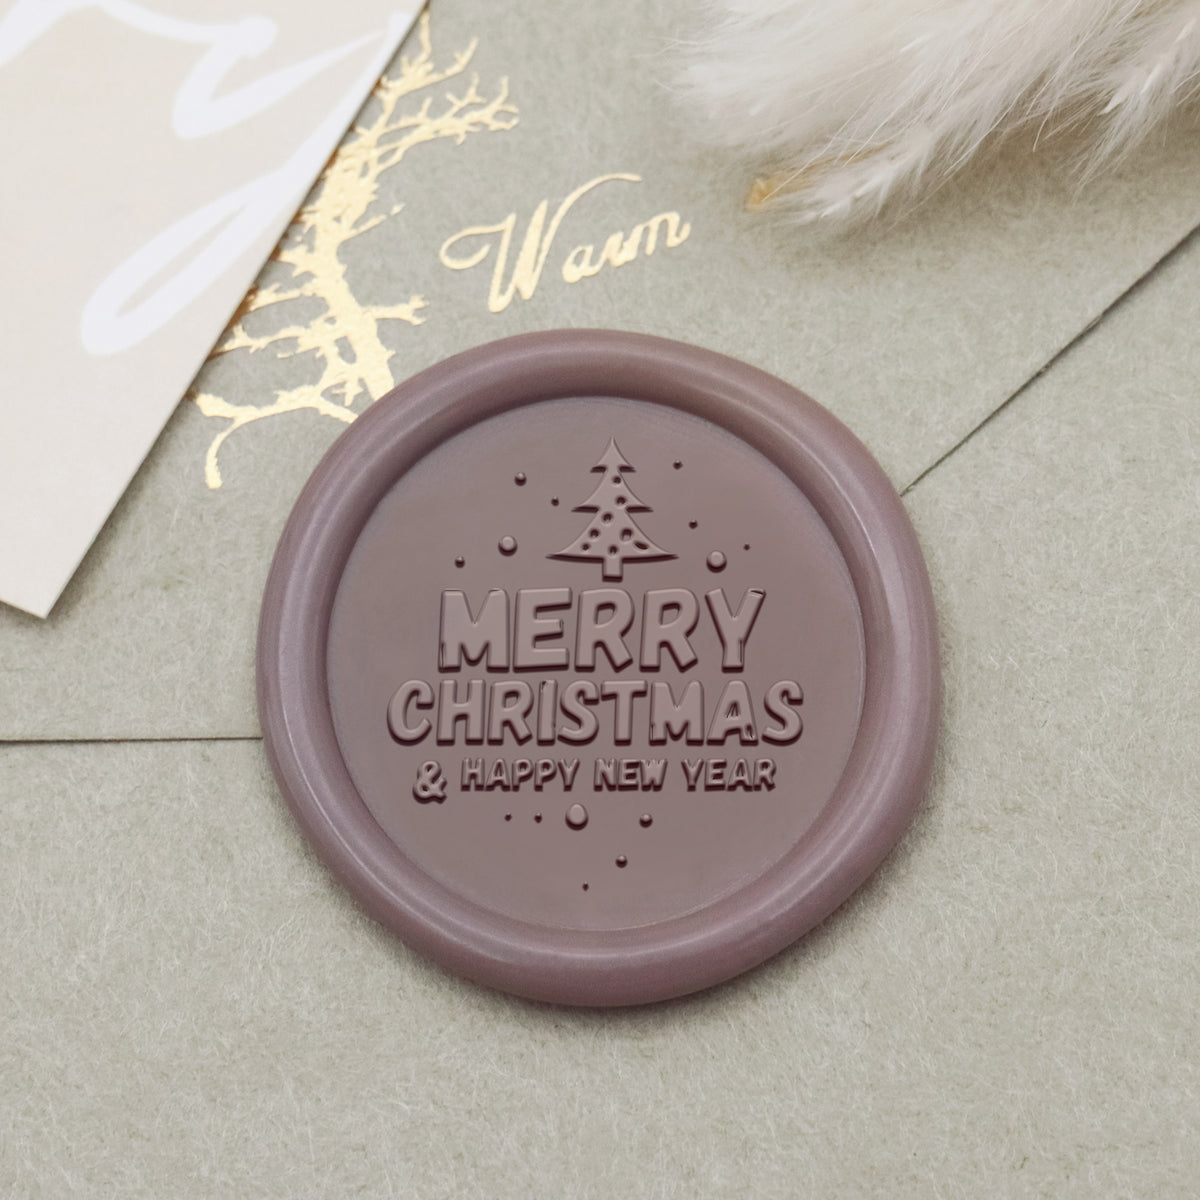 Happy New Year Wax Seal Stamp - Style 27 1